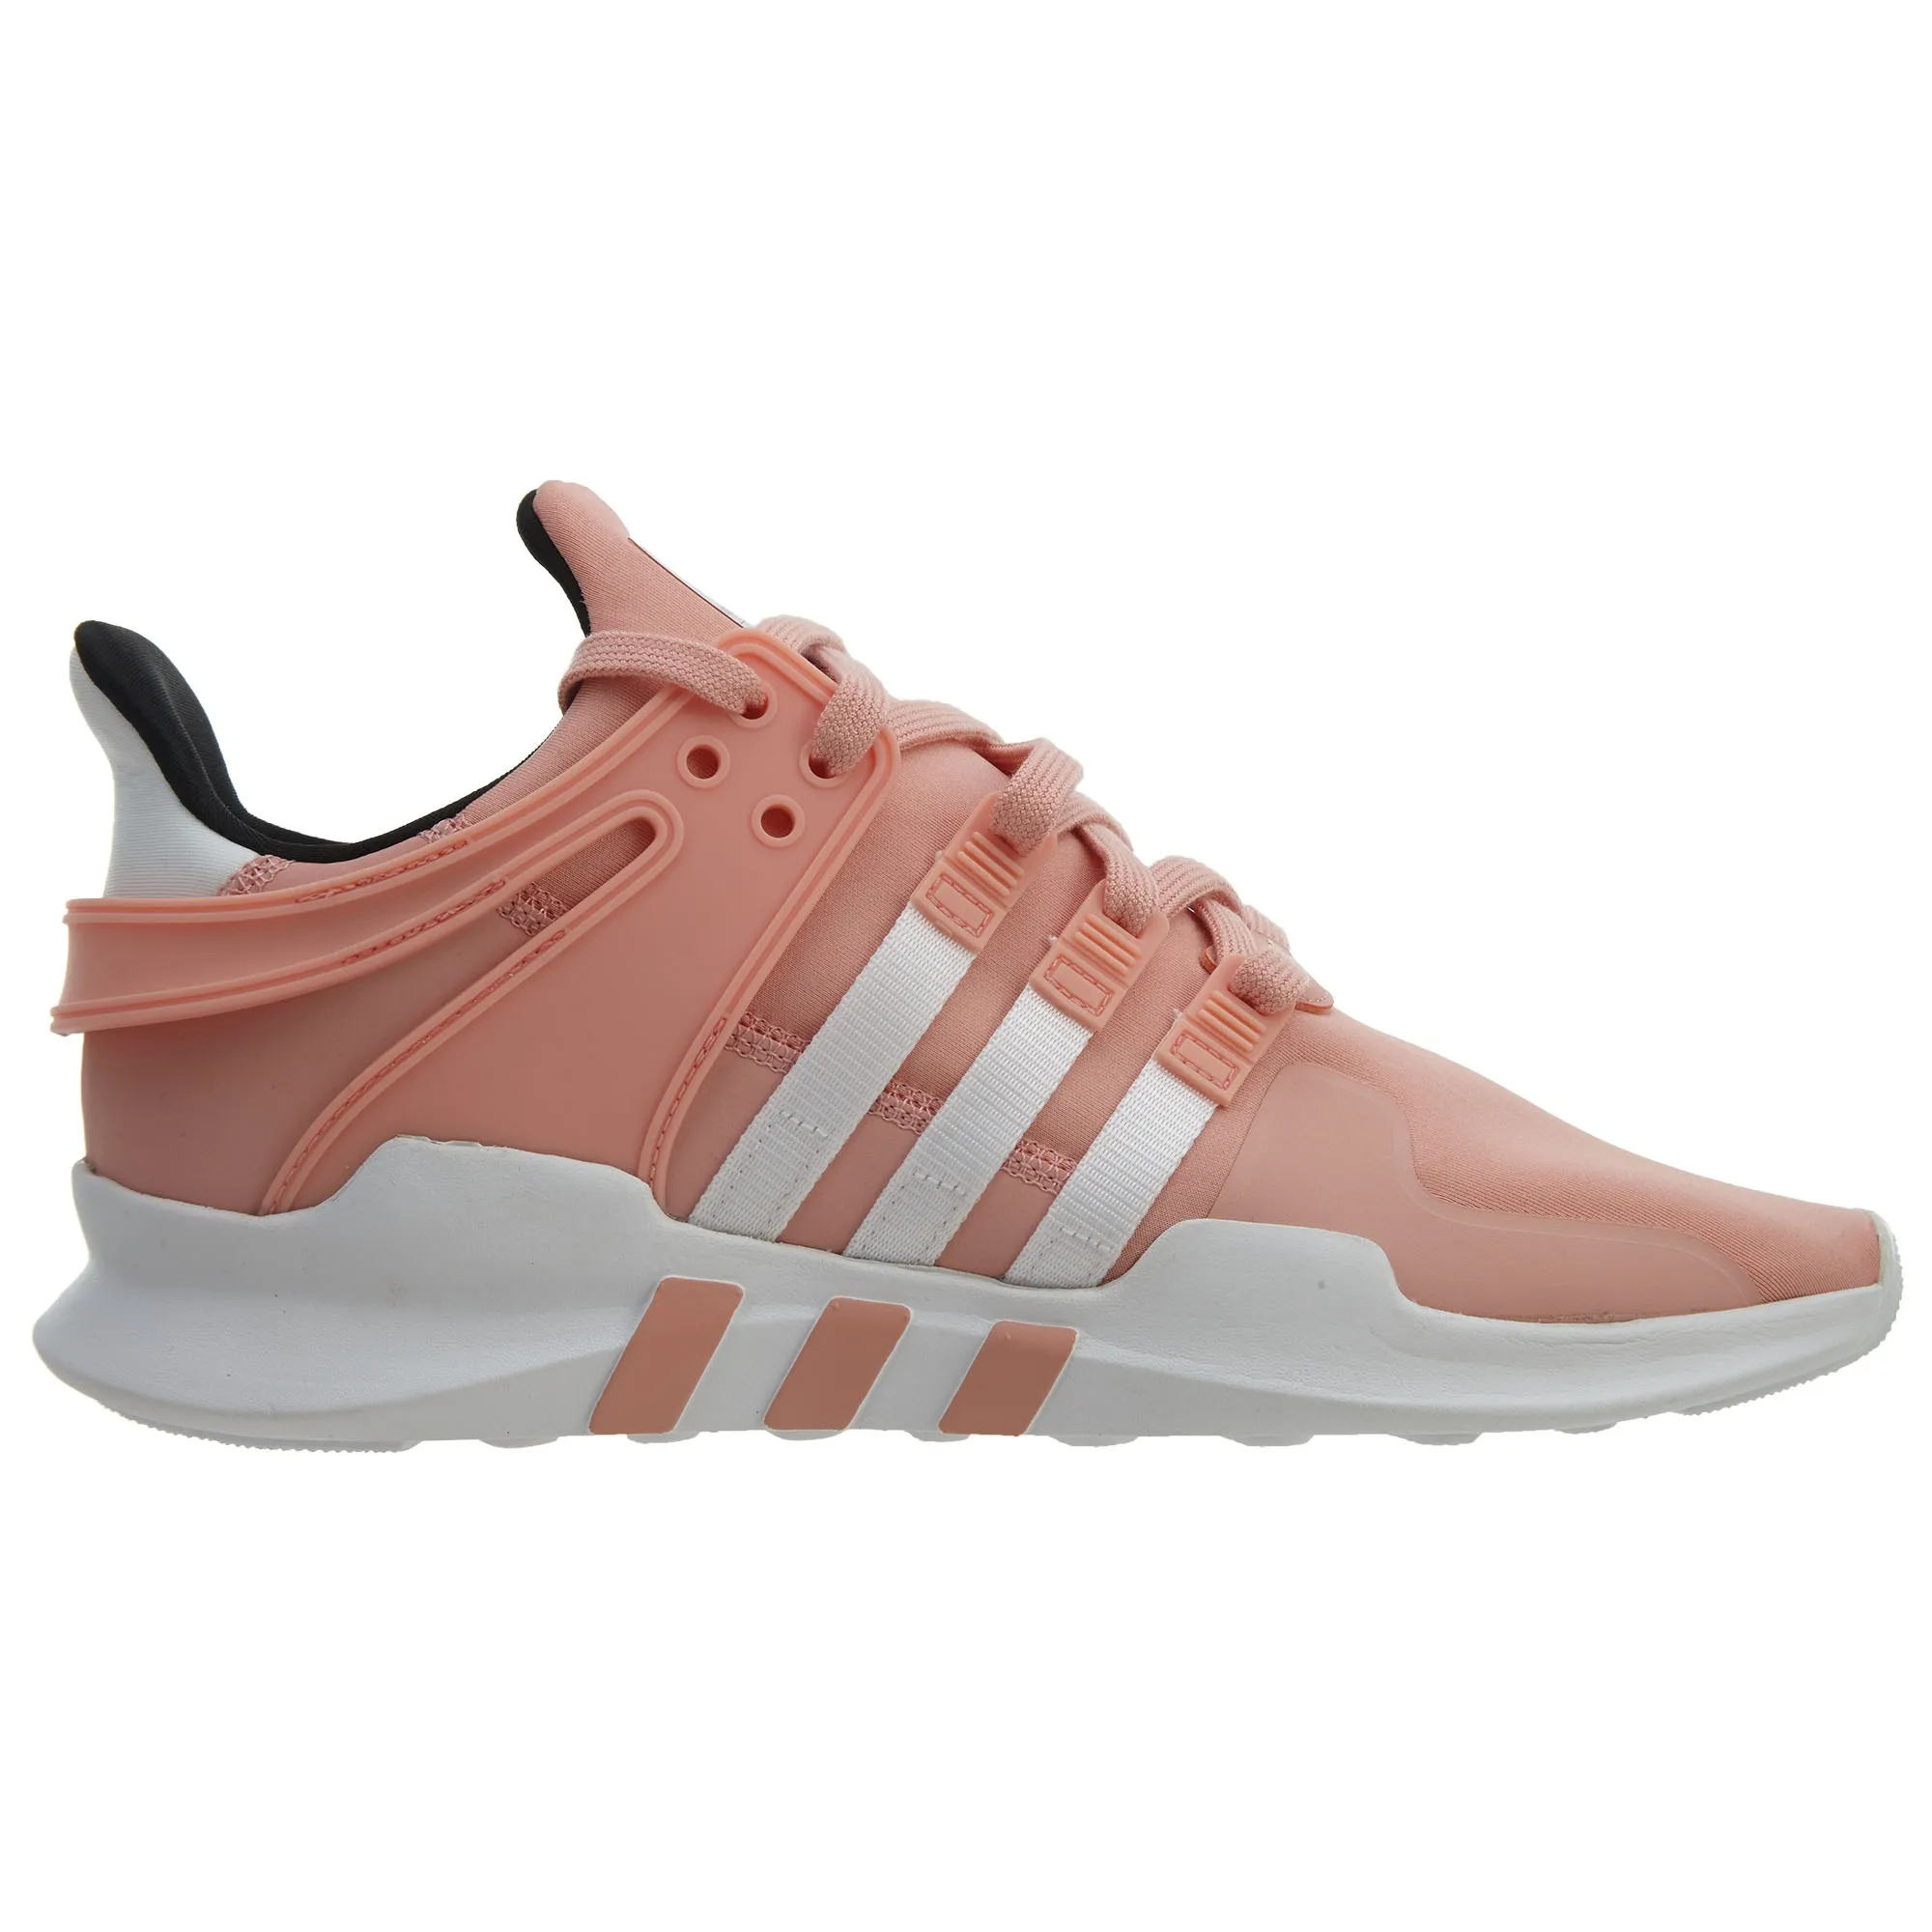 adidas Eqt Support Adv Trace Pink Cloud White-Core Black